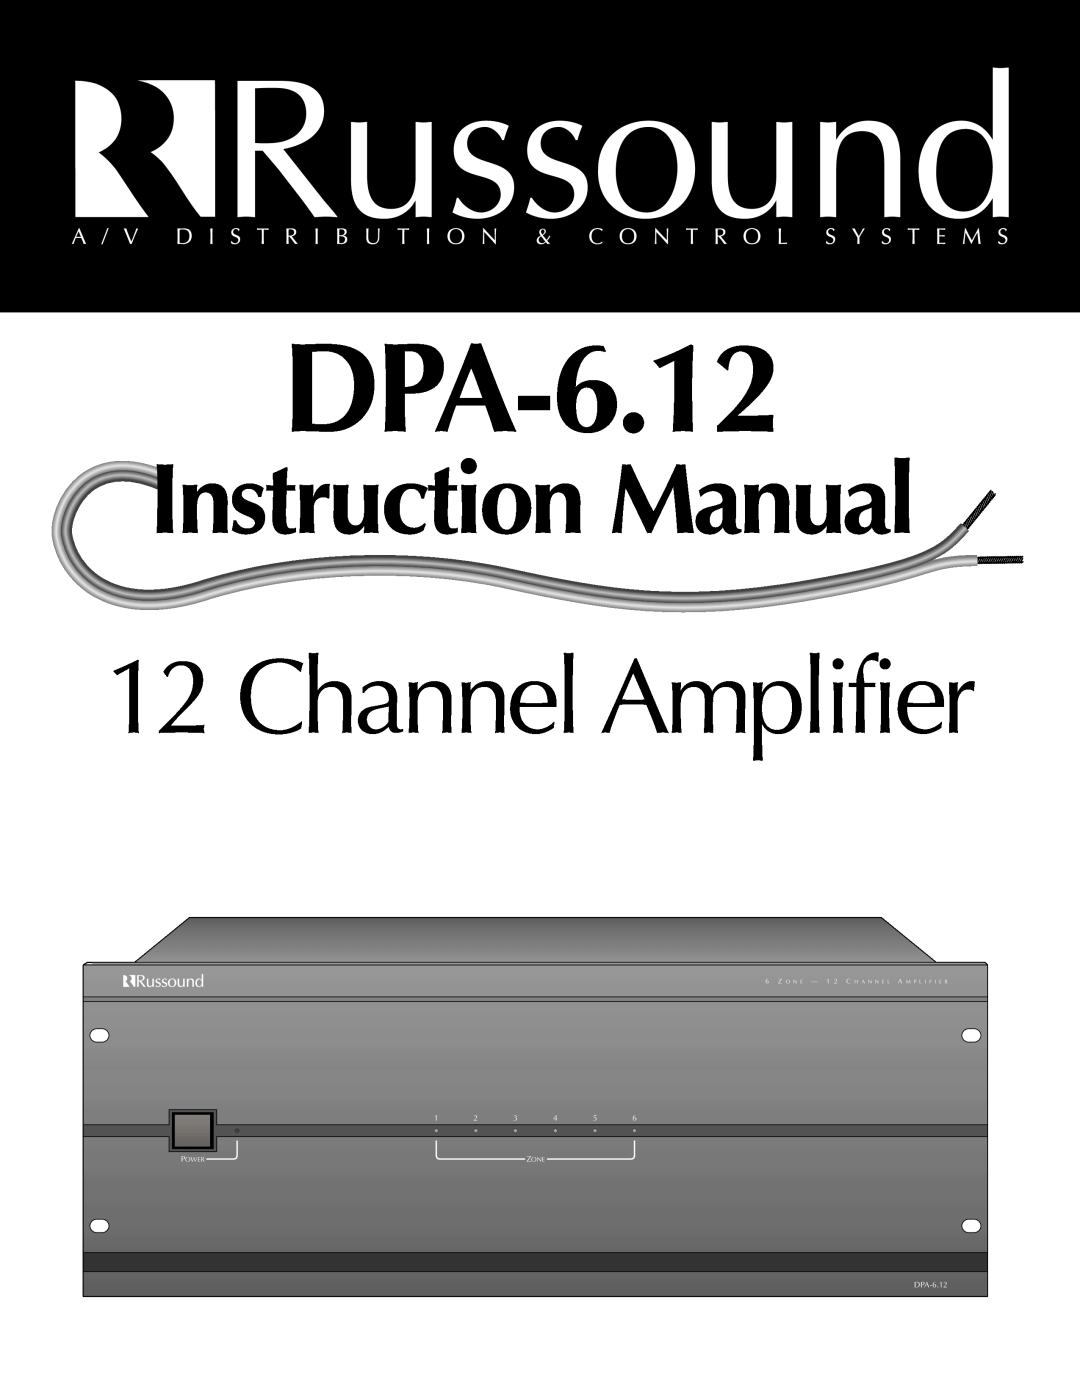 Russound DPA-6.12 instruction manual Channel Amplifier, Instruction Manual, Zone 